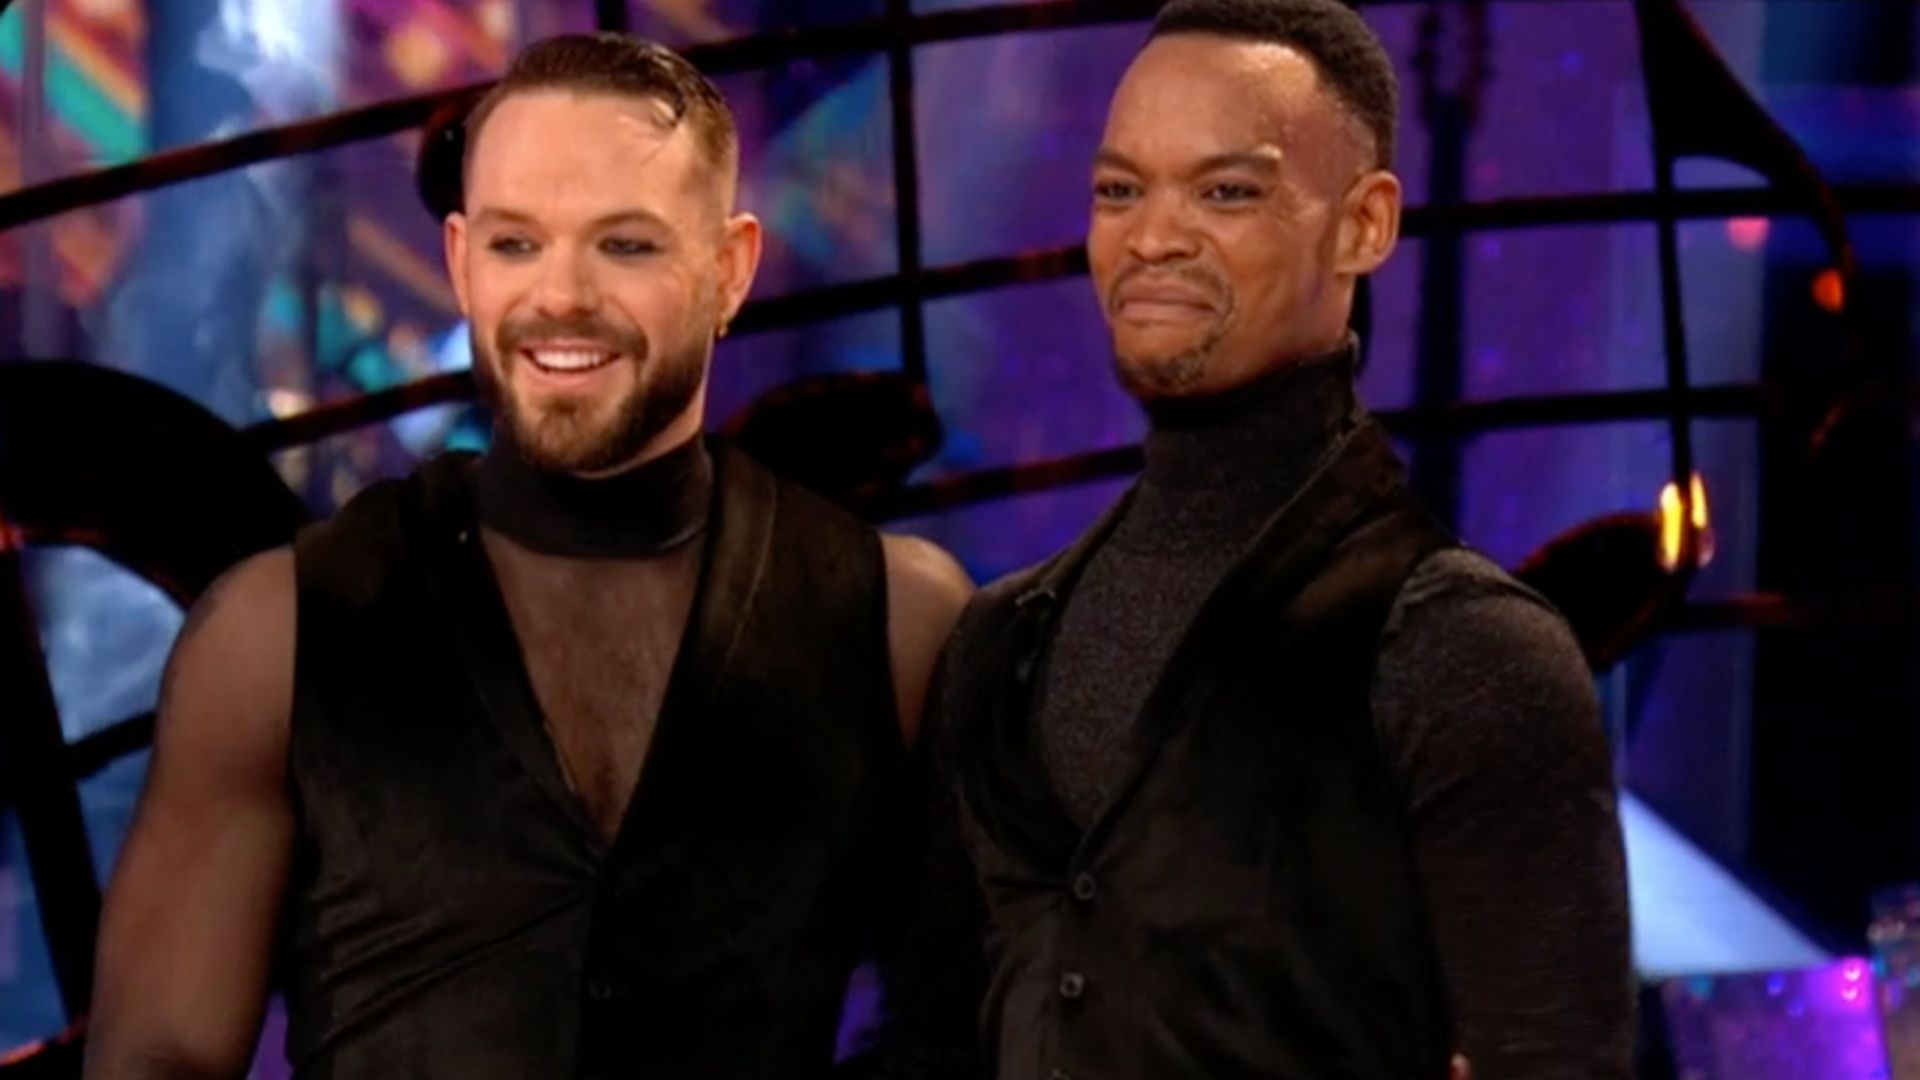 Strictly fans can't get over John Whaite and Johannes Radebe's intense 'chemistry'